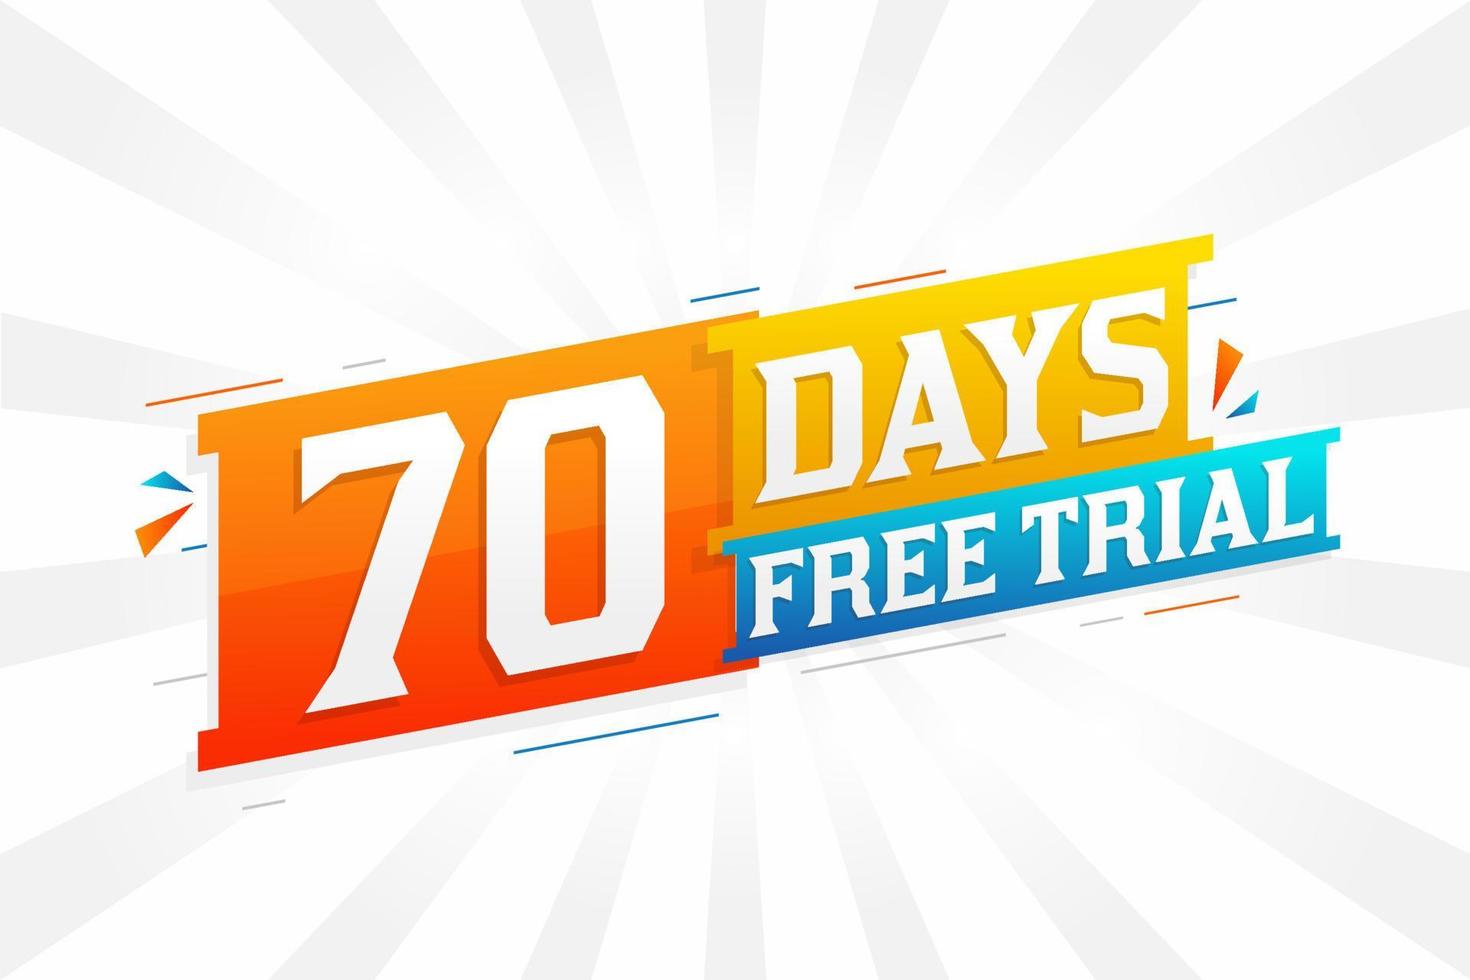 70 Days free Trial promotional bold text stock vector